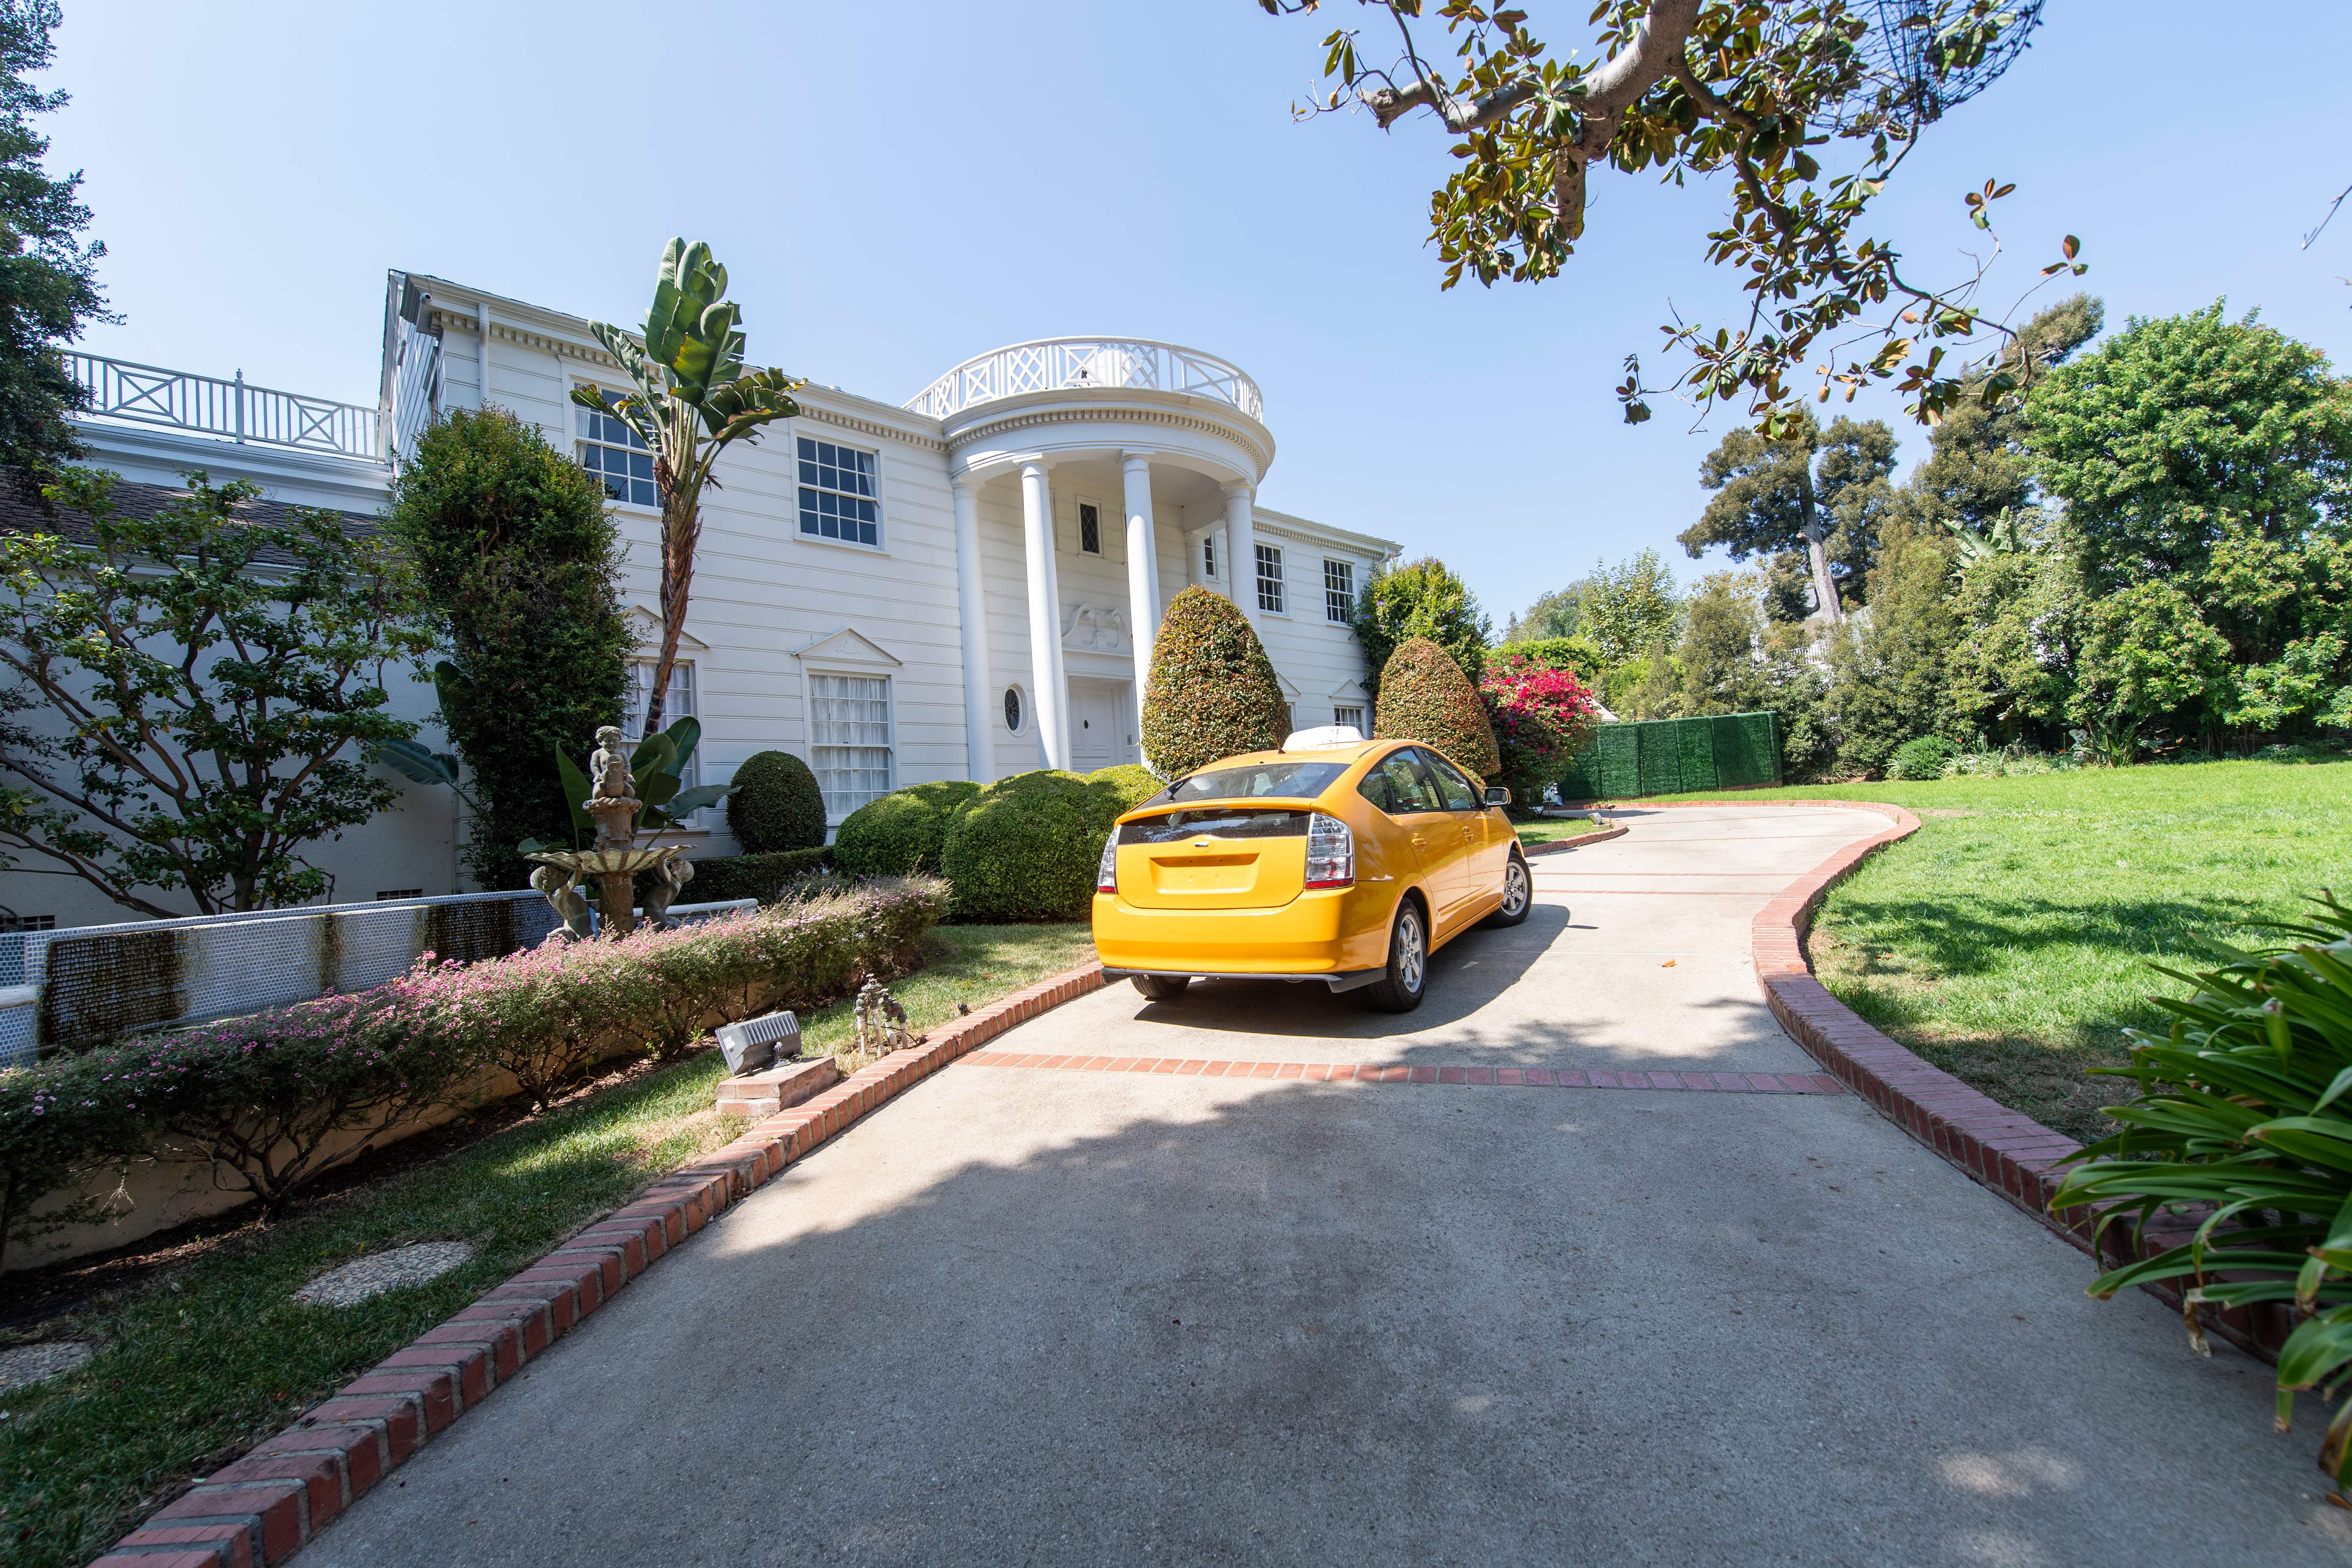 A yellow cab drives by the "Fresh Prince of Bel Air" mansion, just like in the series opening credits, on September 24, 2020, in Brentwood, California. - The "Fresh Prince of Bel-Air" series, which launched Will Smith's career on television, is celebrating its 30th anniversary. The house where the Banks family lives in the show is available for rent via Airbnb, for $30 a night, for 30 days. The house, which is 6400 sq.ft and worth more than $6 millions, was used for exterior establishing shots in the series, but interior live-actions was shot in a Los Angeles studio. (Photo by VALERIE MACON / AFP) (Photo by VALERIE MACON/AFP via Getty Images)